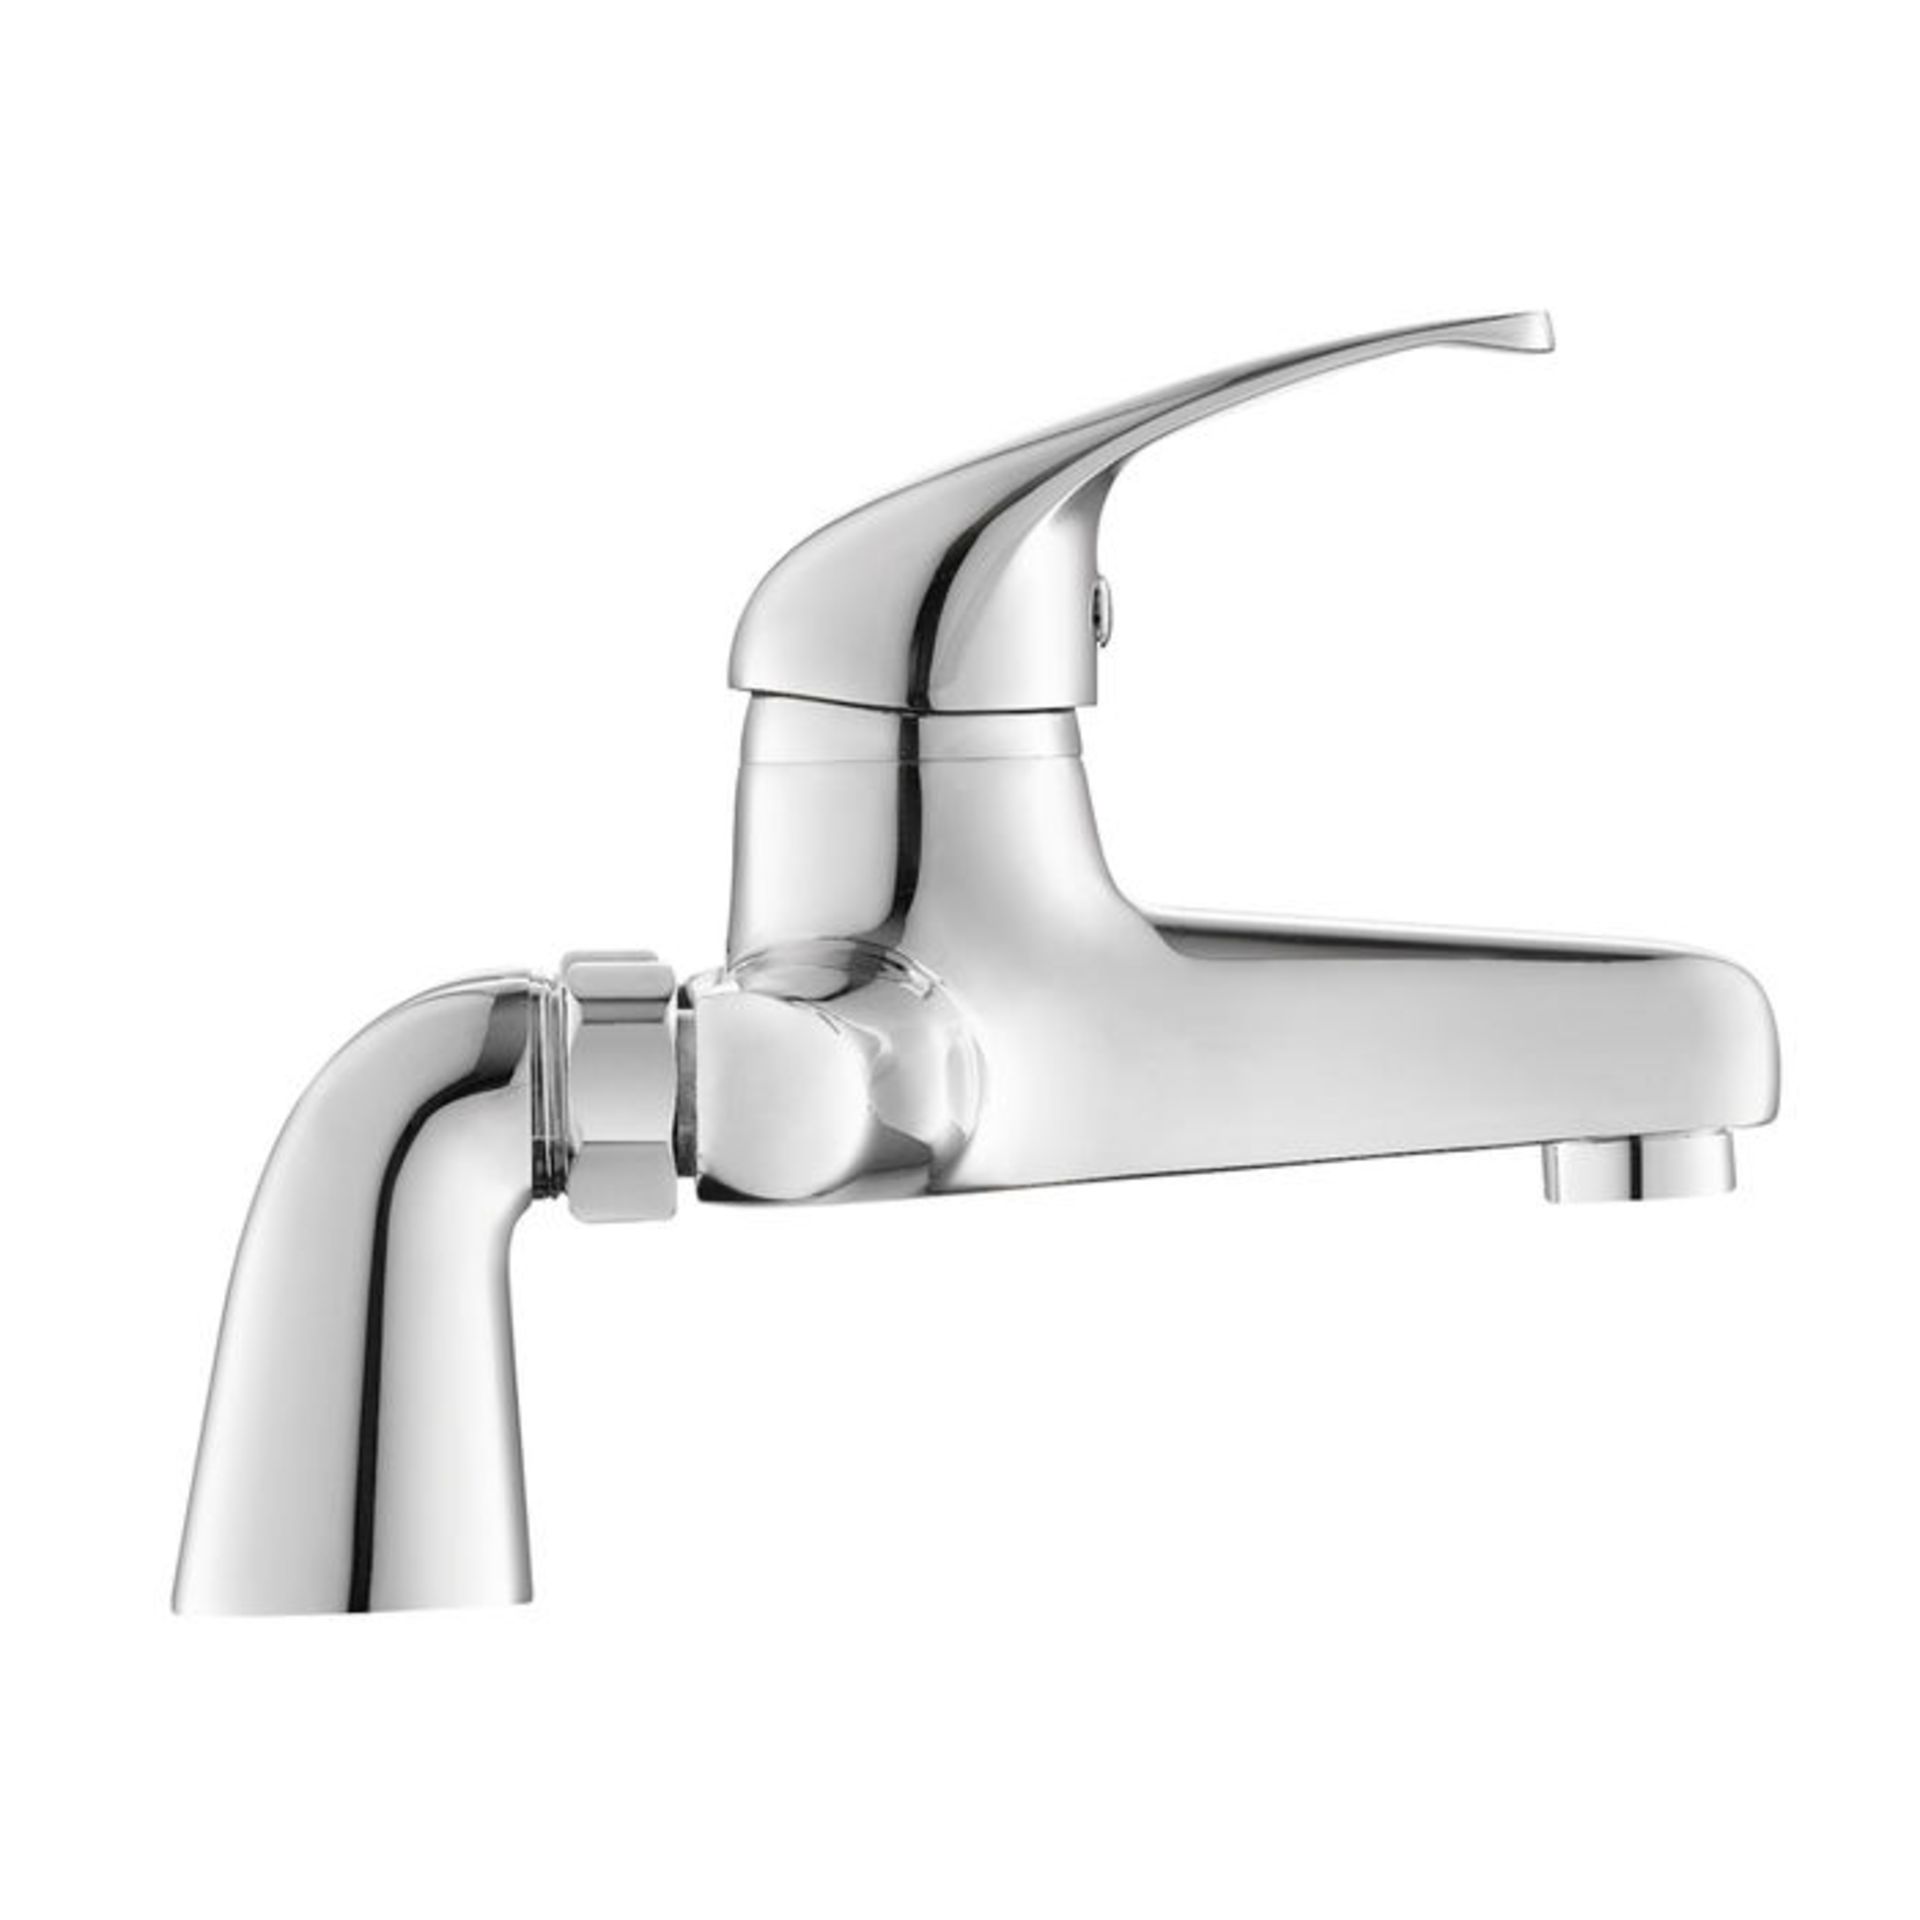 (M1089) Sleek Bath Filler Mixer Tap. Chrome Plated Solid Brass 1/4 turn solid brass valve with... - Image 2 of 2